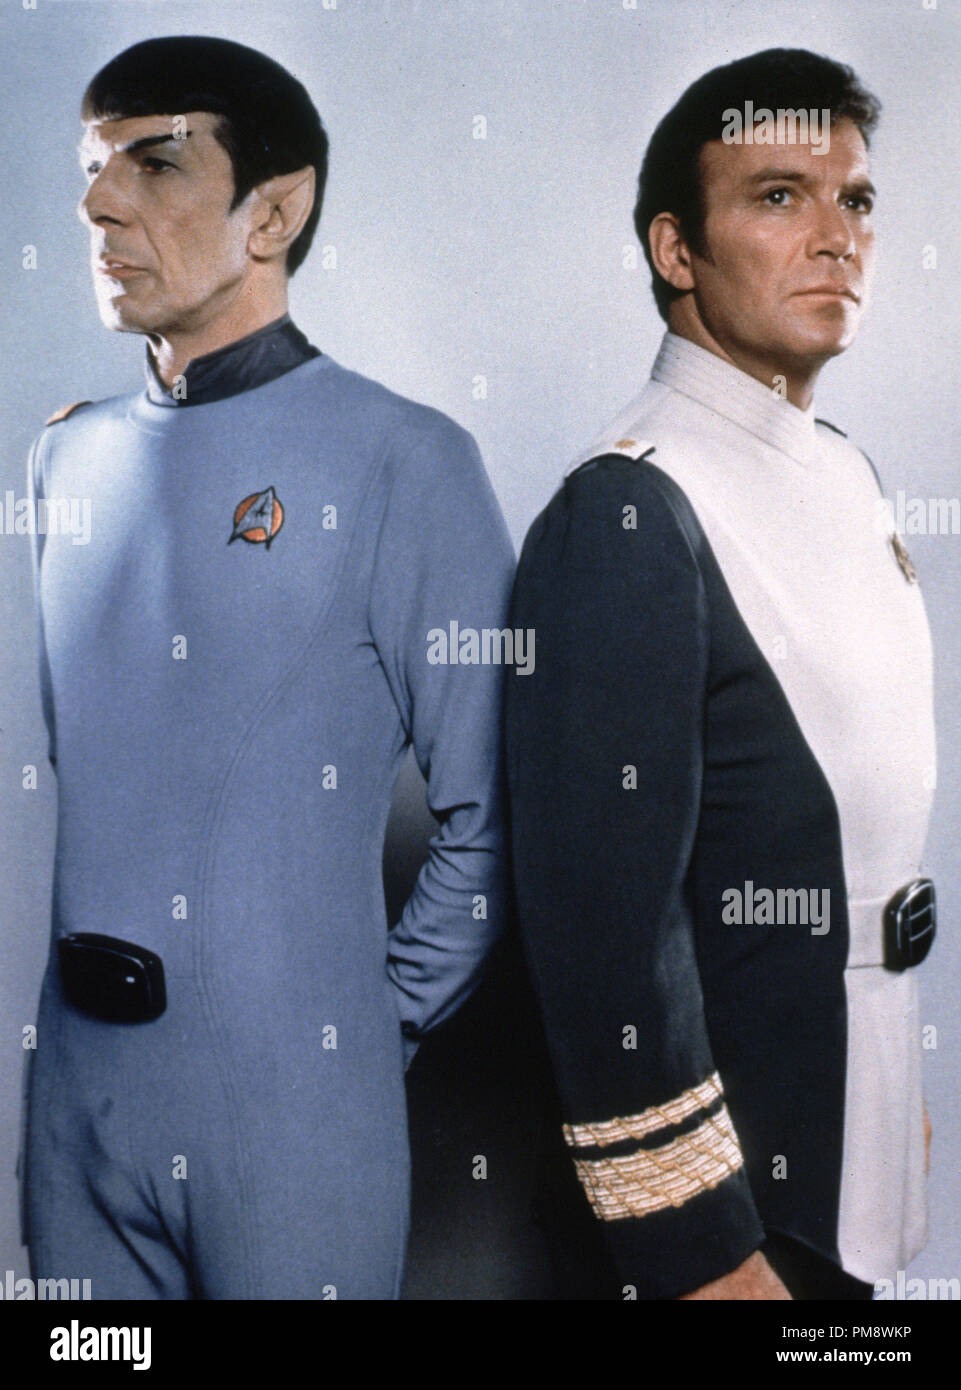 Studio Publicity Still from 'Star Trek: The Motion Picture' Leonard Nimoy, William Shatner © 1979 Paramount All Rights Reserved   File Reference # 31718071THA  For Editorial Use Only Stock Photo